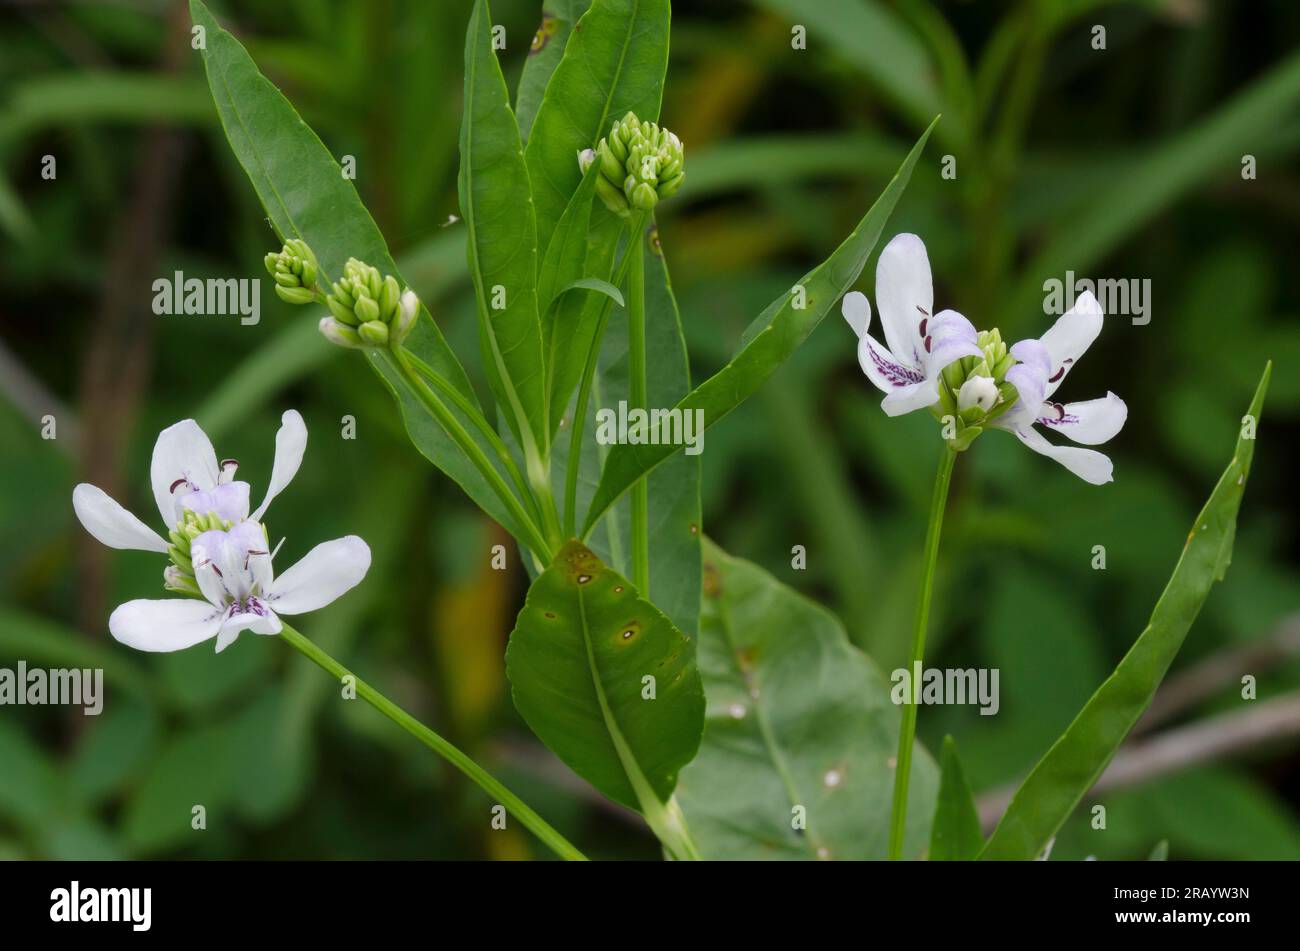 American Water-willow, Justicia americana Stock Photo